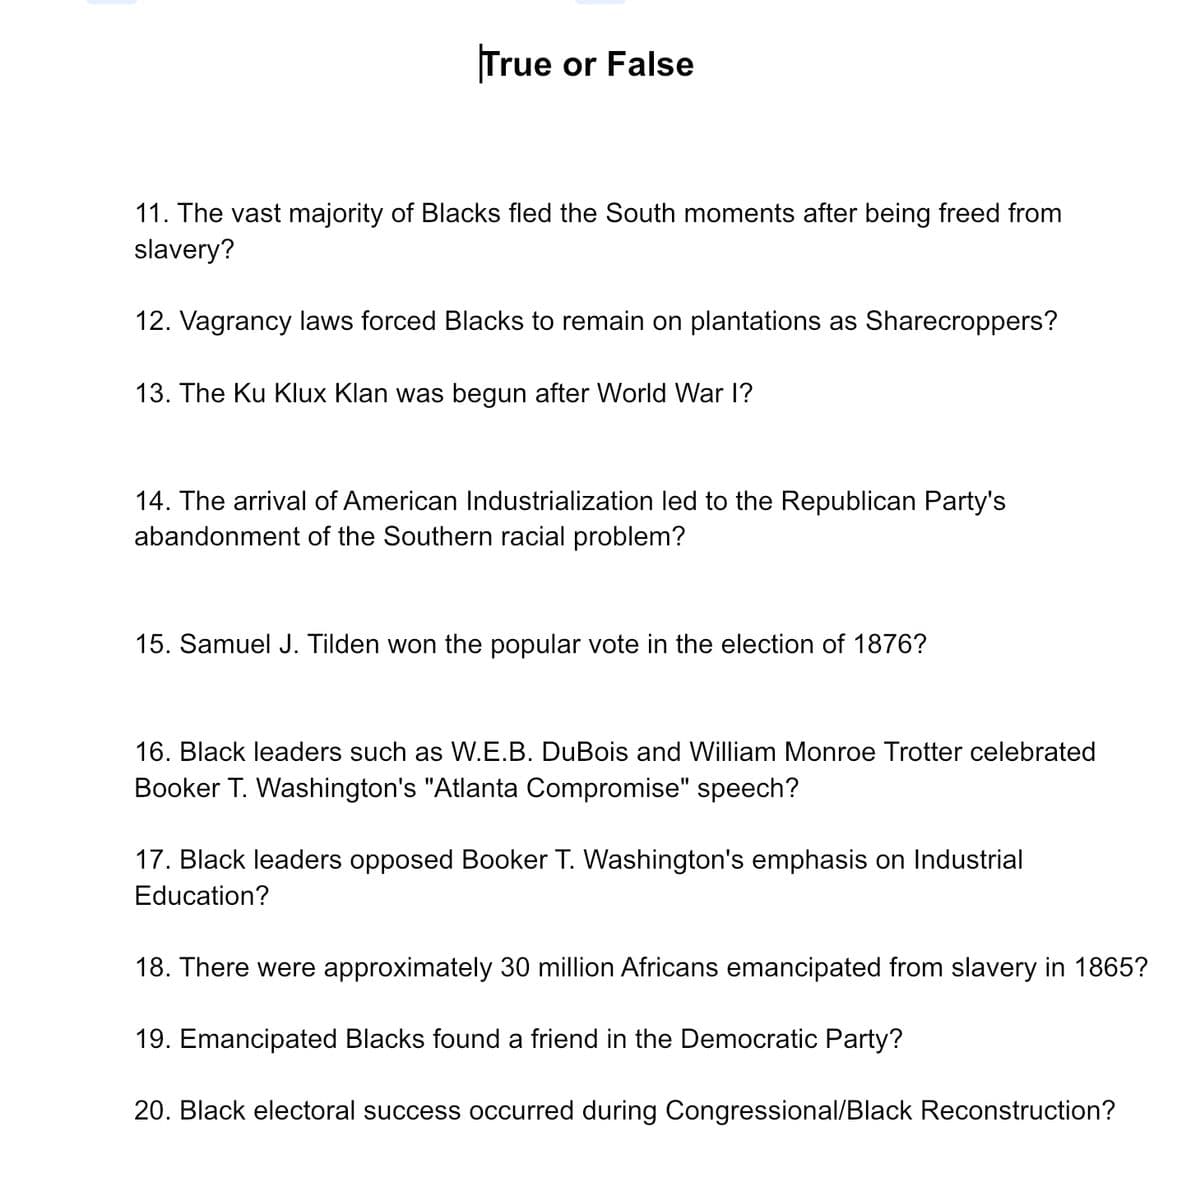 True or False
11. The vast majority of Blacks fled the South moments after being freed from
slavery?
12. Vagrancy laws forced Blacks to remain on plantations as Sharecroppers?
13. The Ku Klux Klan was begun after World War I?
14. The arrival of American Industrialization led to the Republican Party's
abandonment of the Southern racial problem?
15. Samuel J. Tilden won the popular vote in the election of 1876?
16. Black leaders such as W.E.B. DuBois and William Monroe Trotter celebrated
Booker T. Washington's "Atlanta Compromise" speech?
17. Black leaders opposed Booker T. Washington's emphasis on Industrial
Education?
18. There were approximately 30 million Africans emancipated from slavery in 1865?
19. Emancipated Blacks found a friend in the Democratic Party?
20. Black electoral success occurred during Congressional/Black Reconstruction?